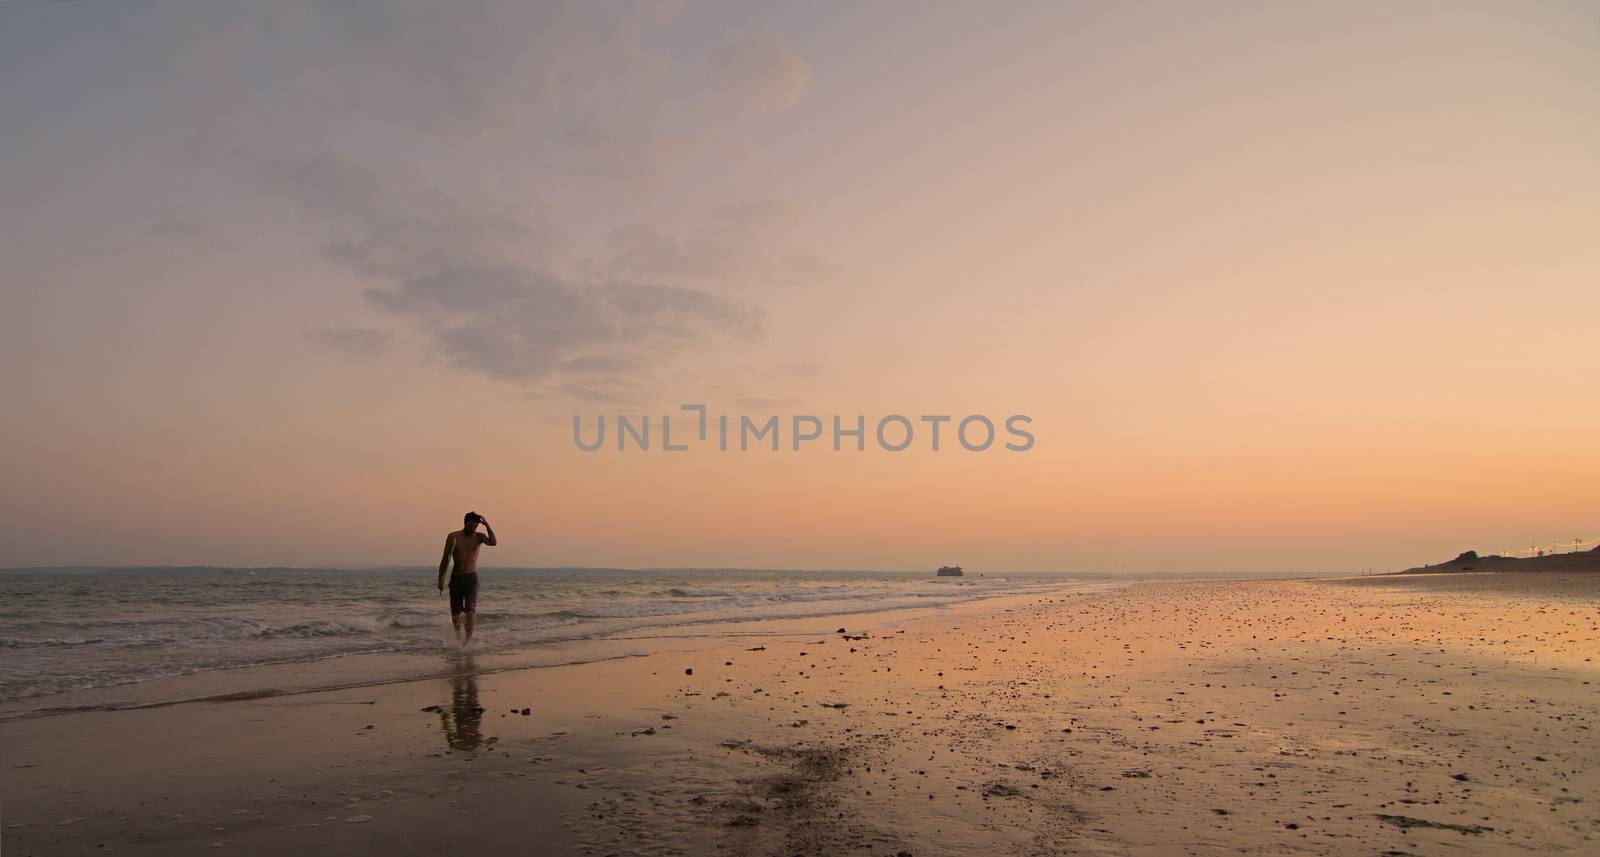 A single surfer walking along the shore, with the sun setting behind him